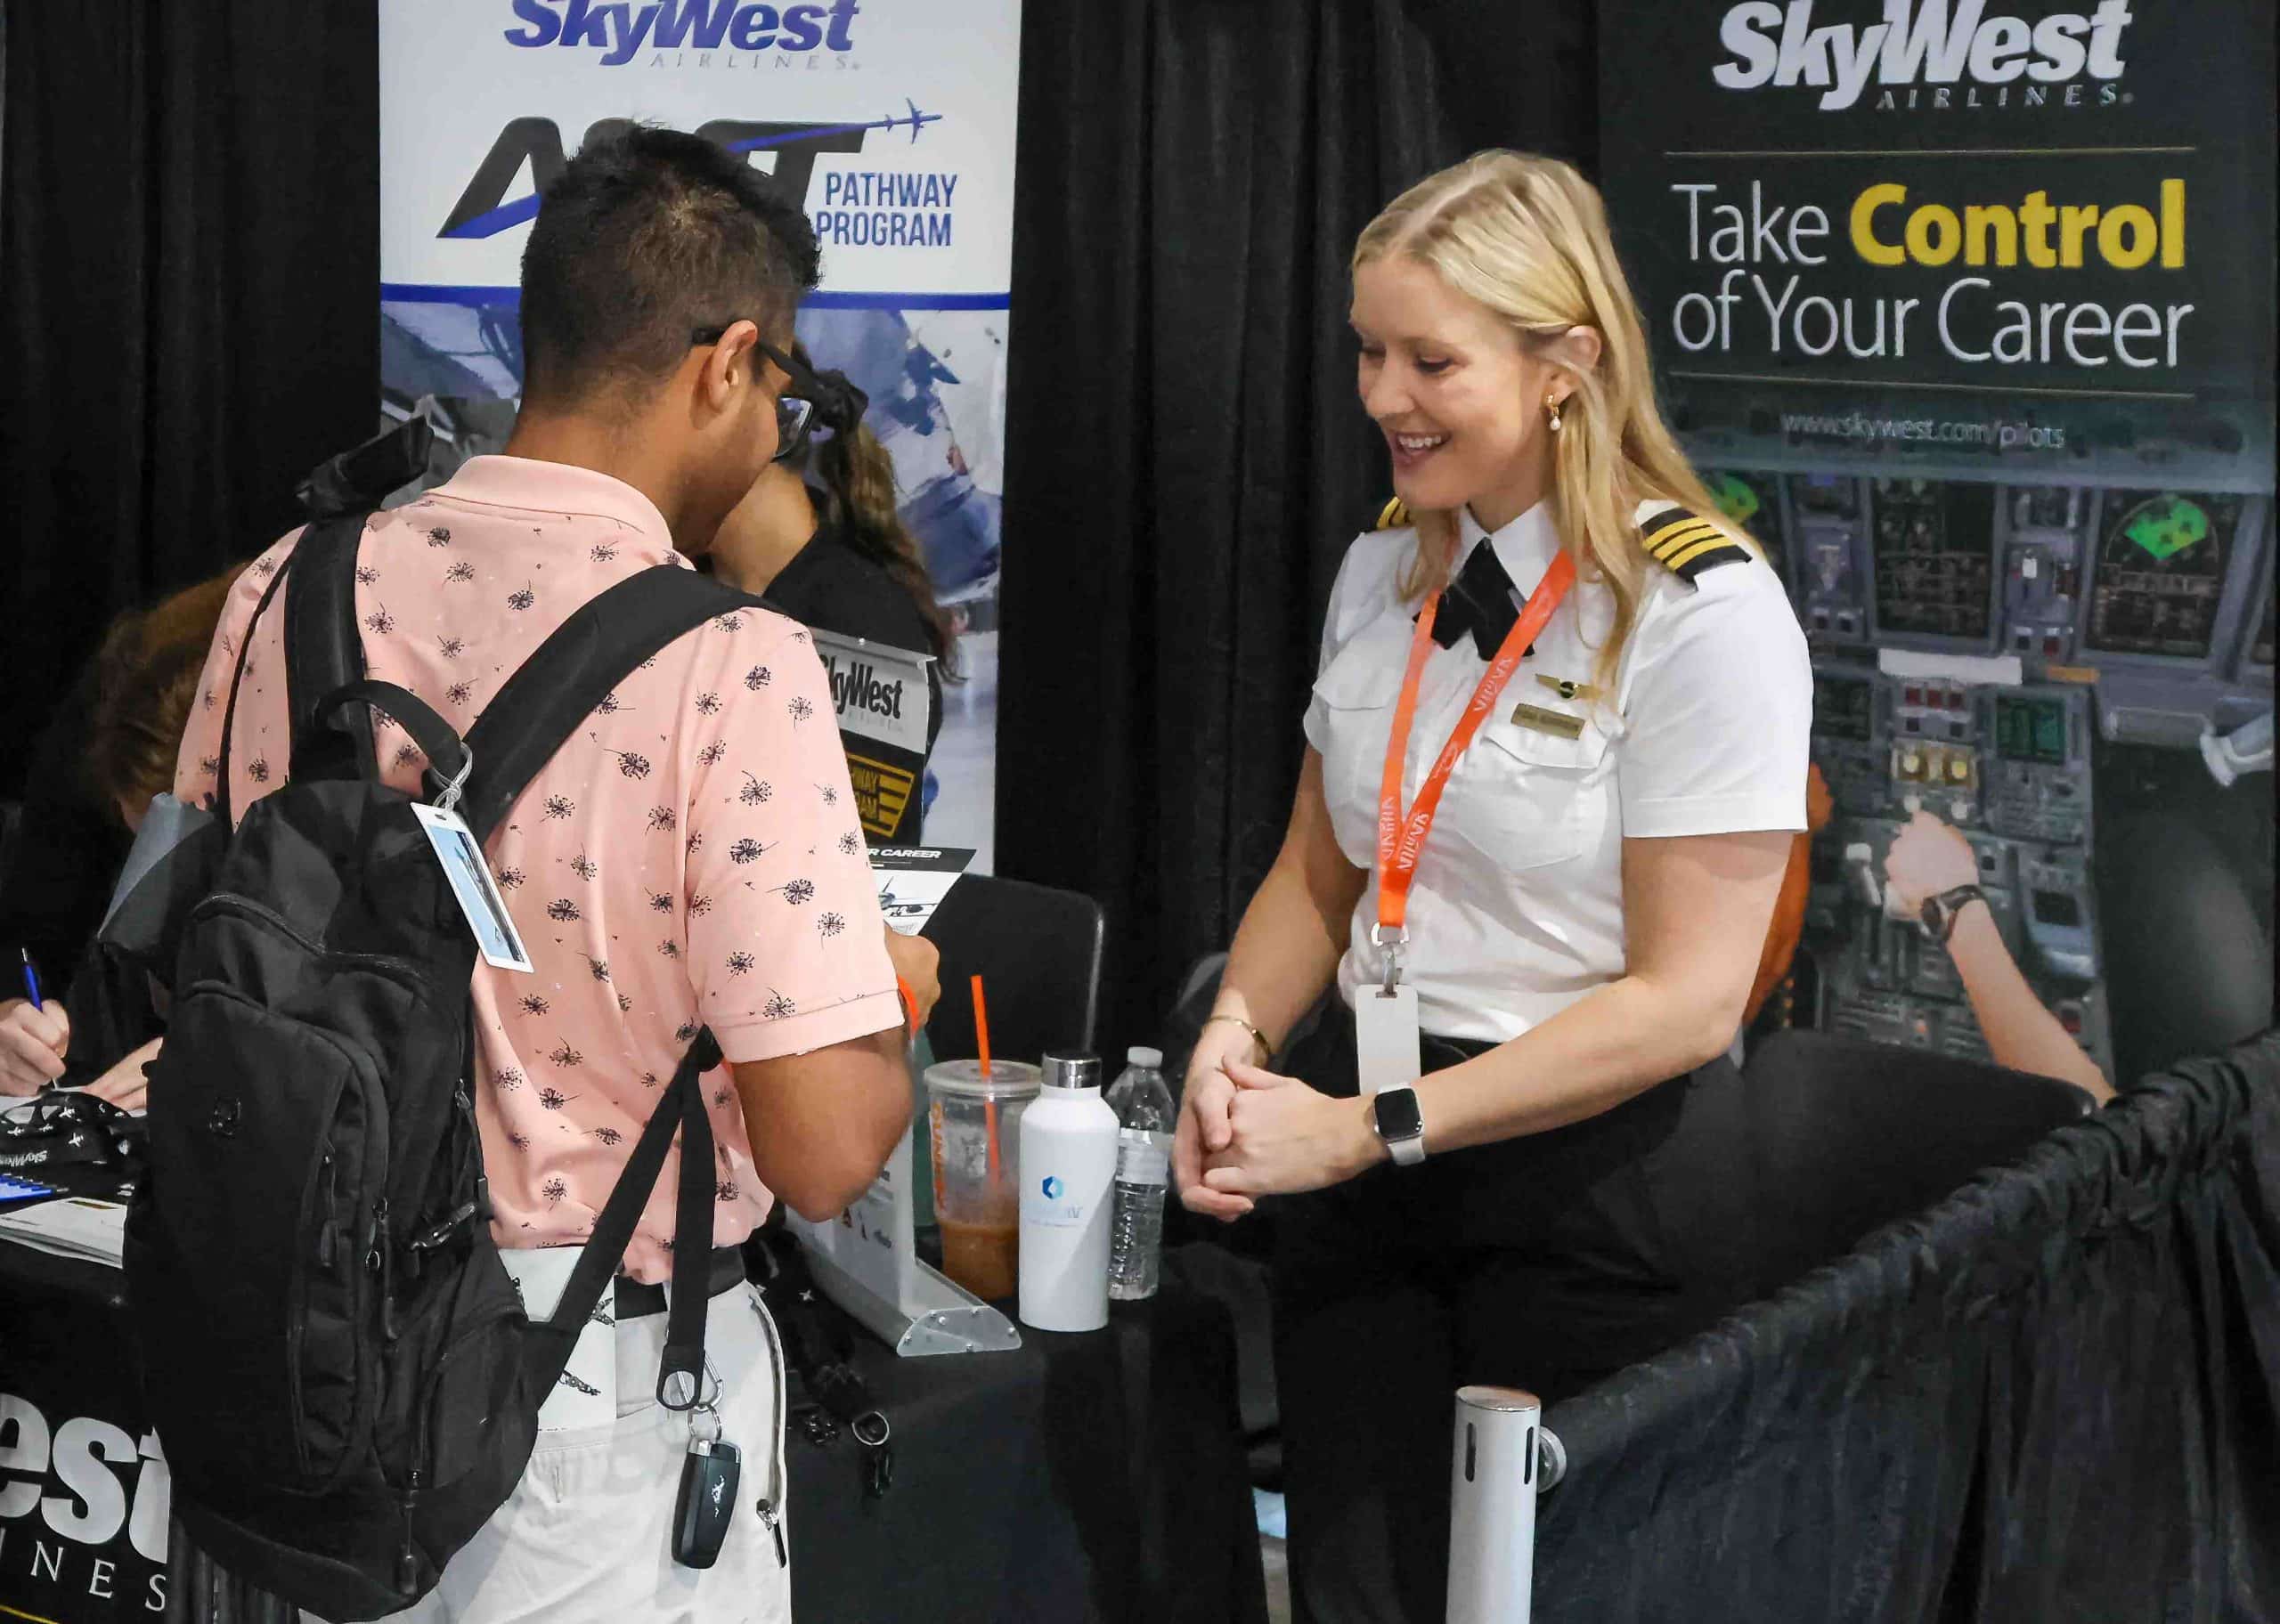 SkyWest Airlines First Officer Fiona Morrison discusses employment at SkyWest with a potential recruit. Photo credit: Mark Stone